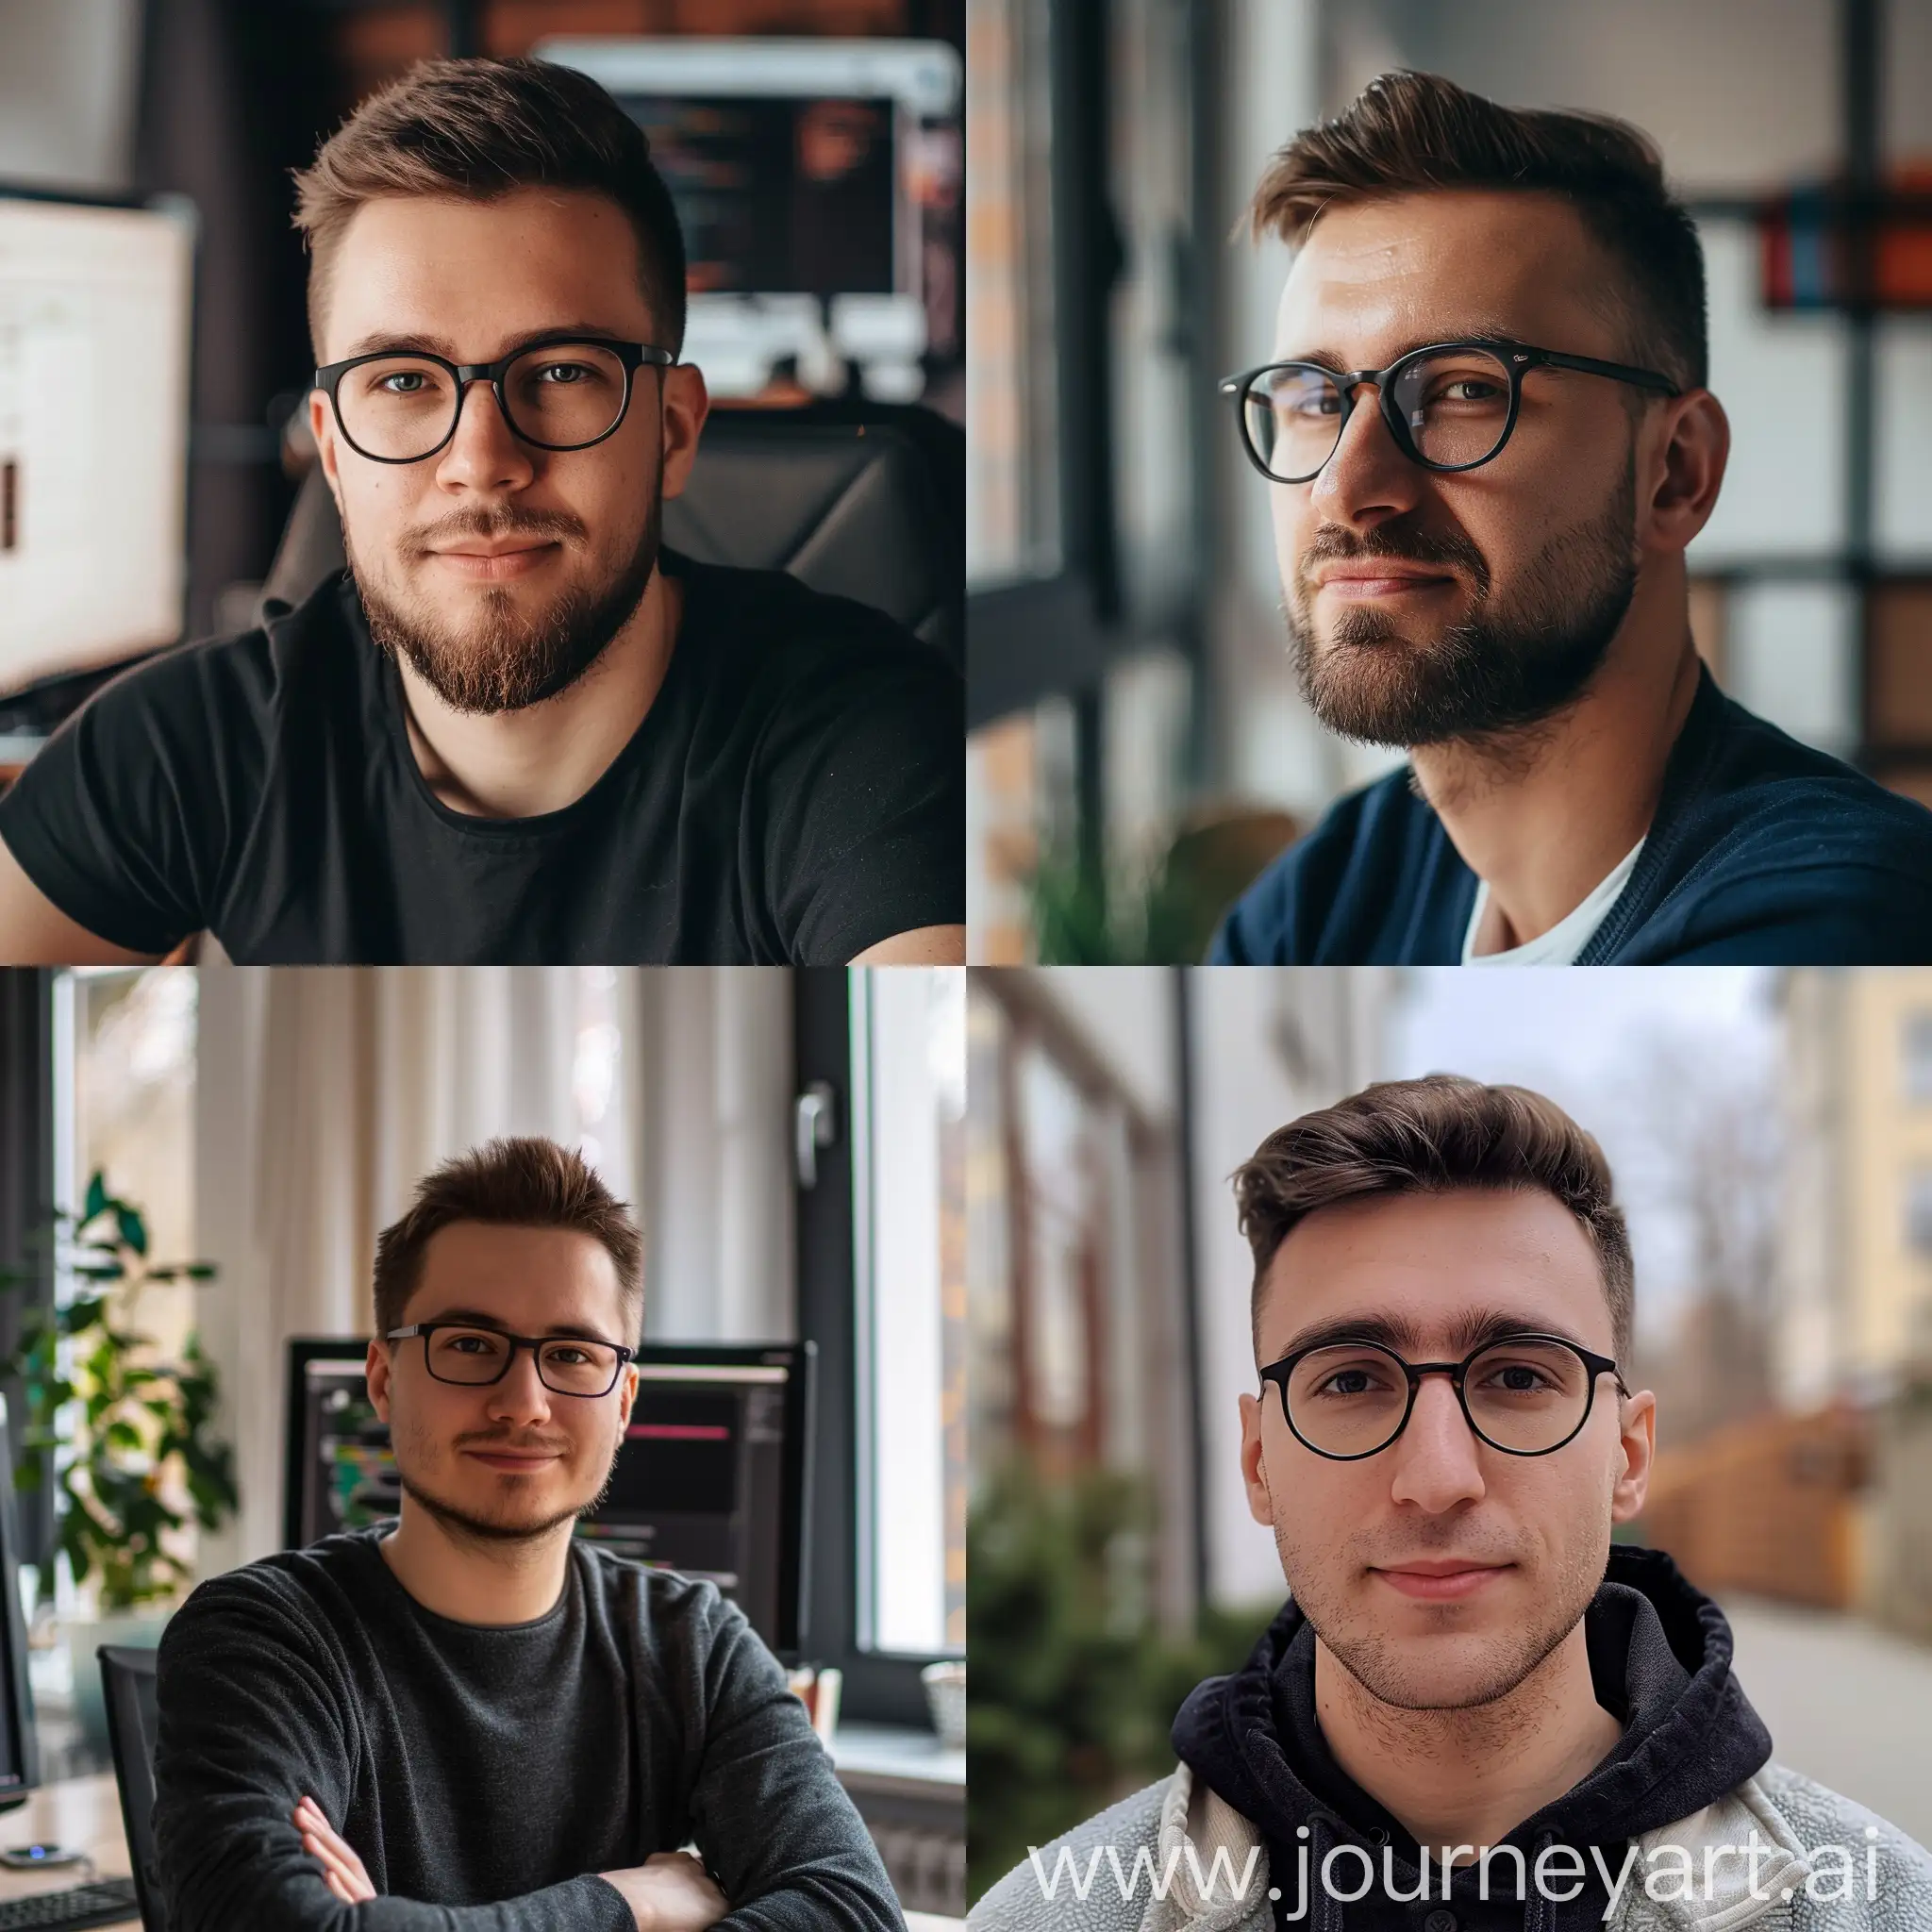 please create a polish male image for the age of 30 years full stack developer